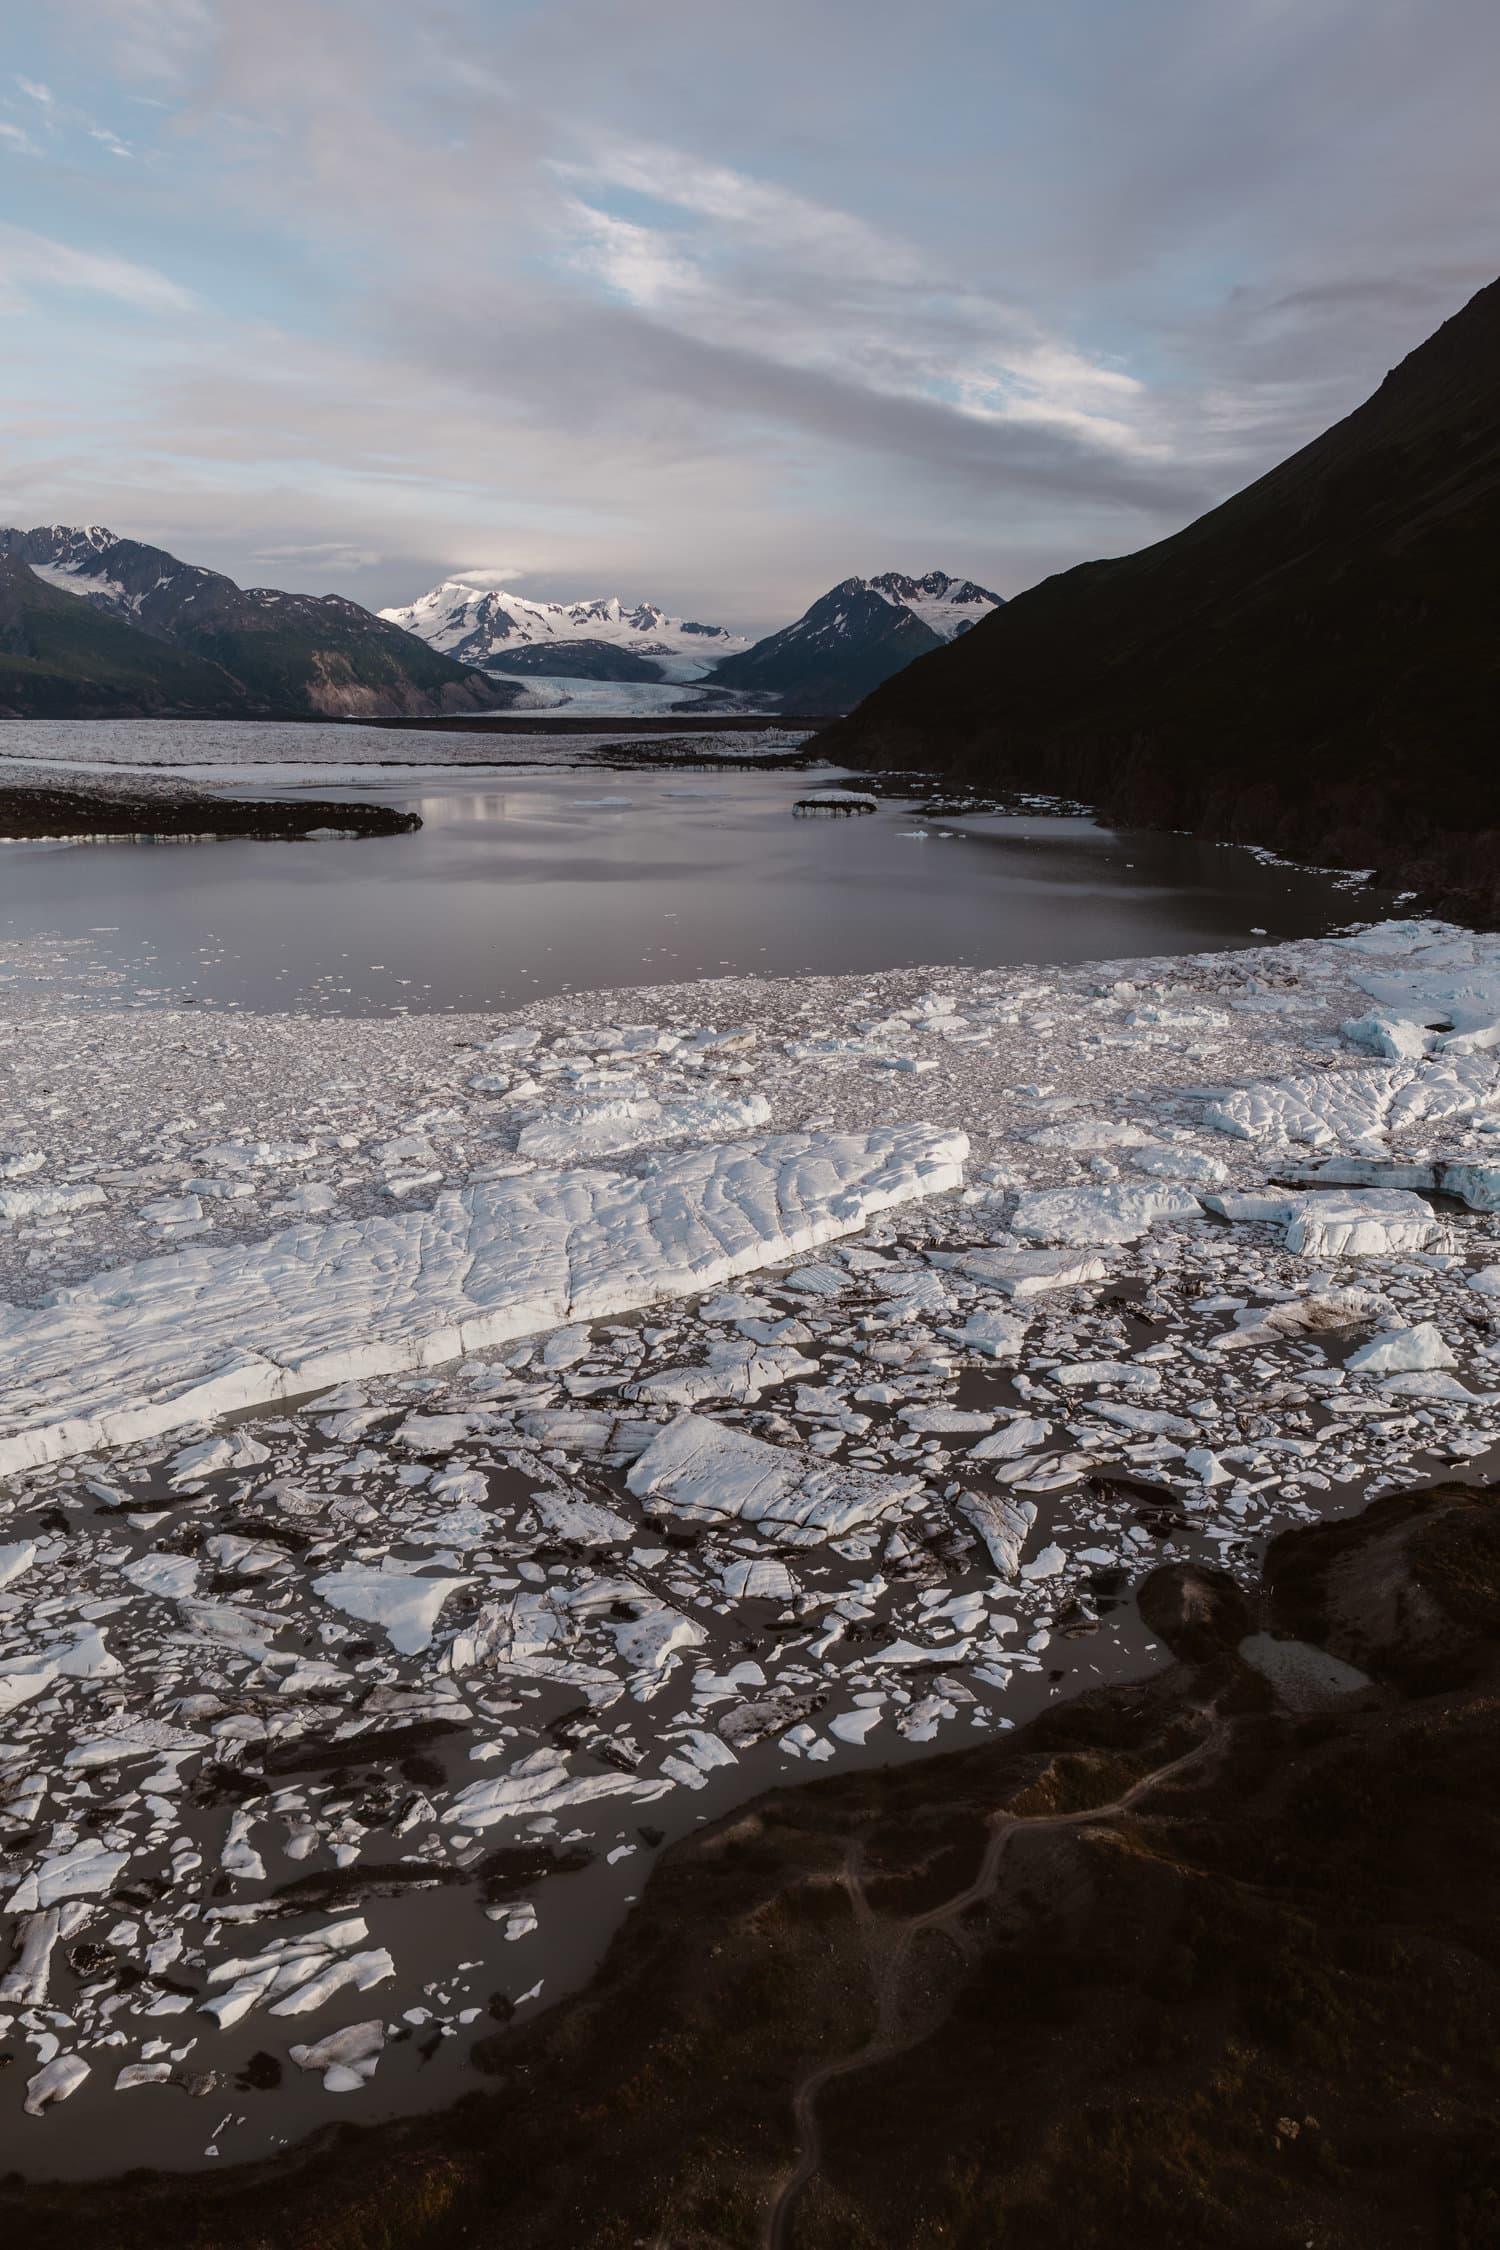 Landscape of Knik Glacier in Alaska. There are snow covered mountains in the background. 